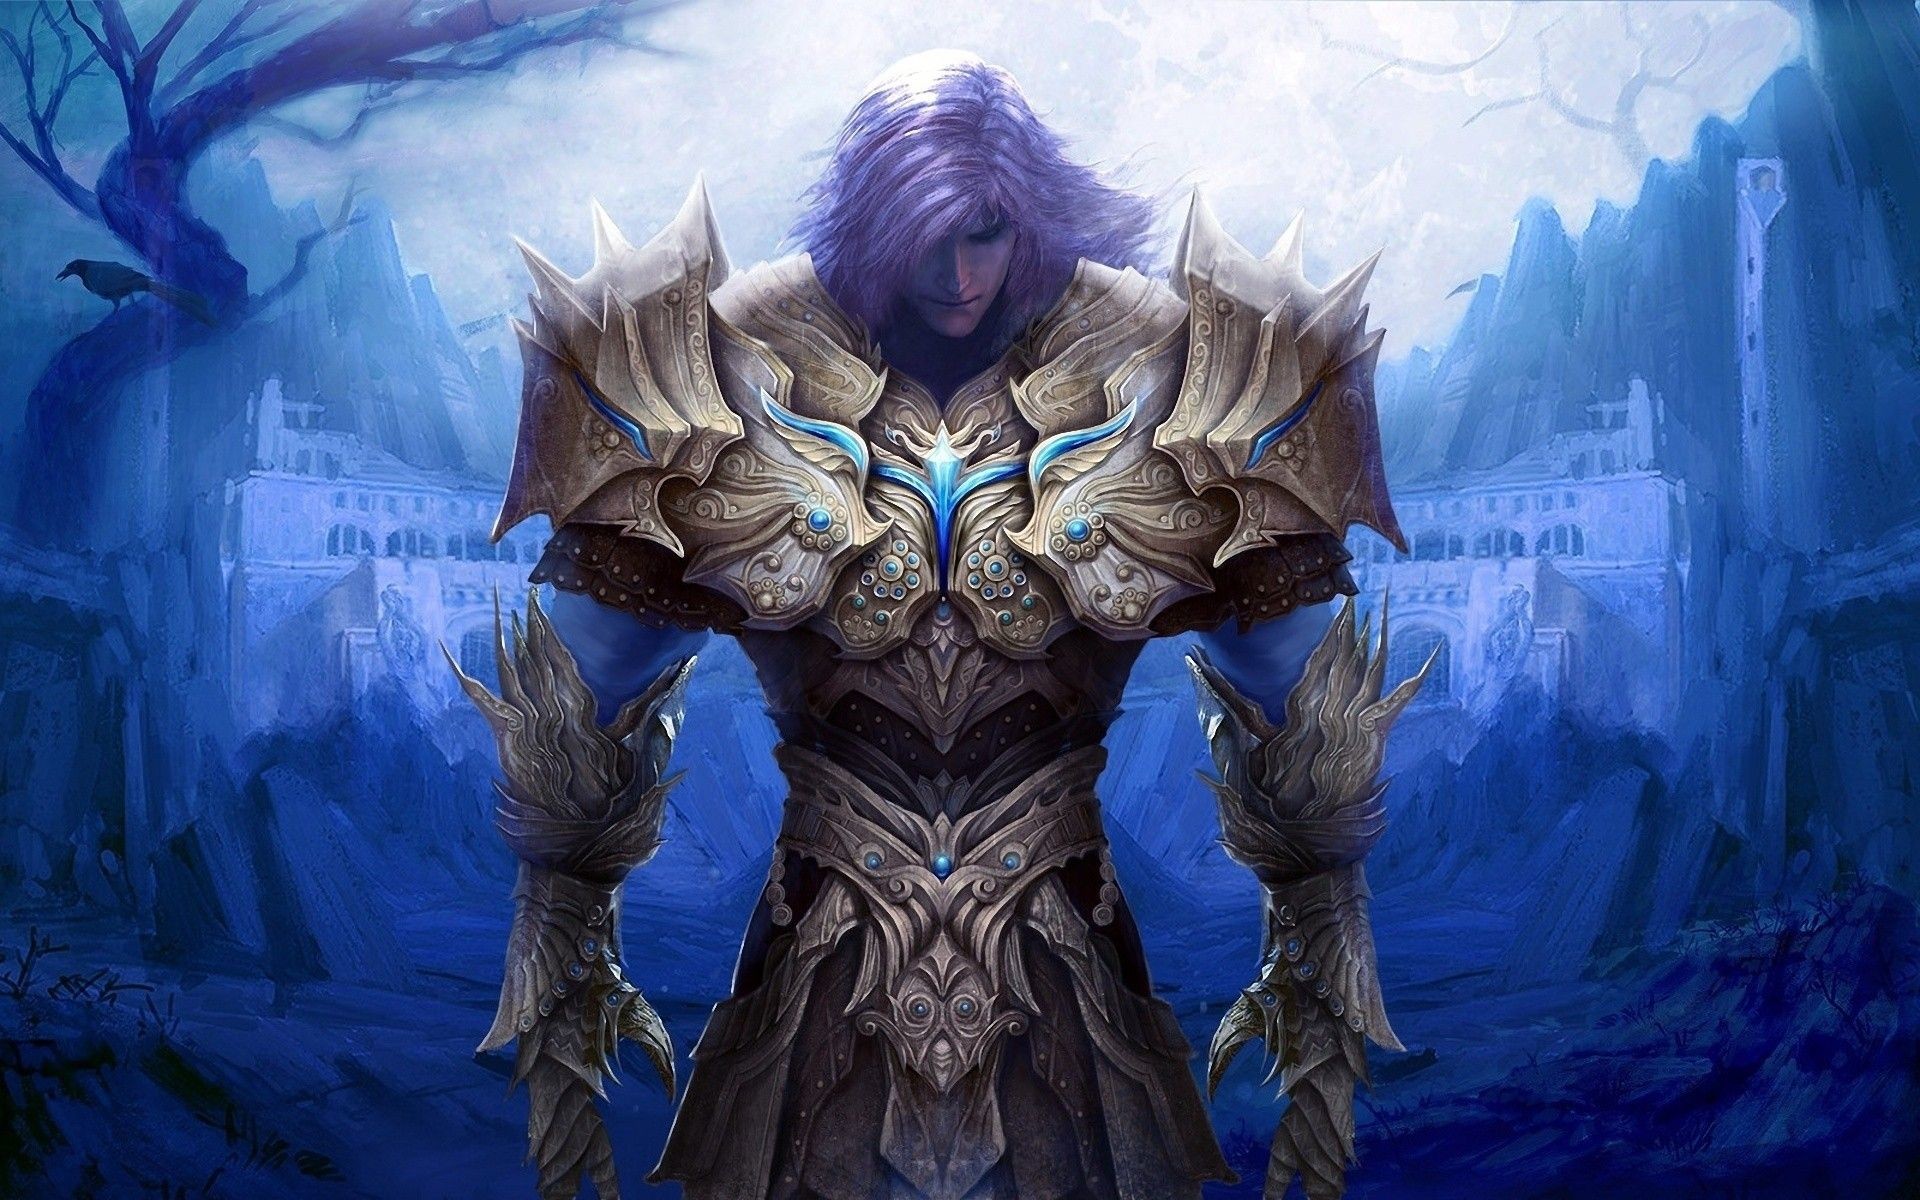 1920x1200 World Of Warcraft Paladin Picture On Wallpaper Hd 1920 x 1200 px 692.31 KB  hunter worgen